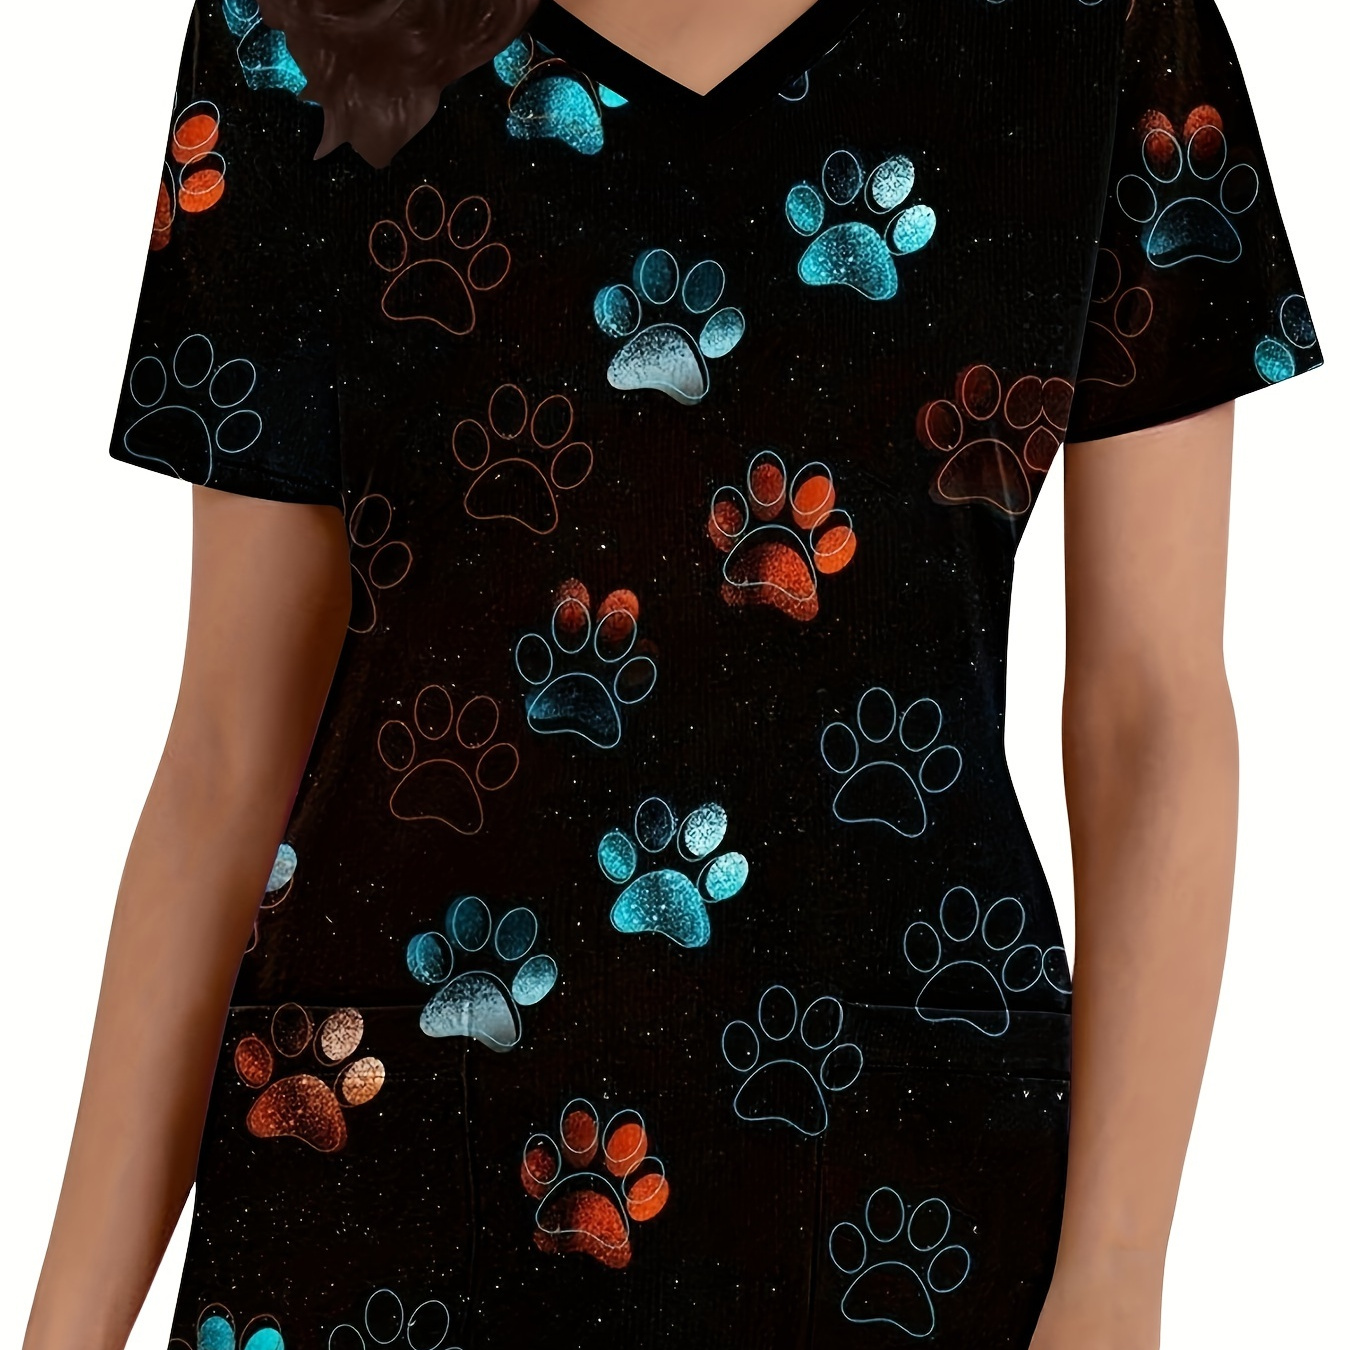 

Cute Paw Print Scrub Top, Comfortable & Functional Health Care Uniform Perfect For Working In Hospitals & Dental Office, Women's Work Clothing